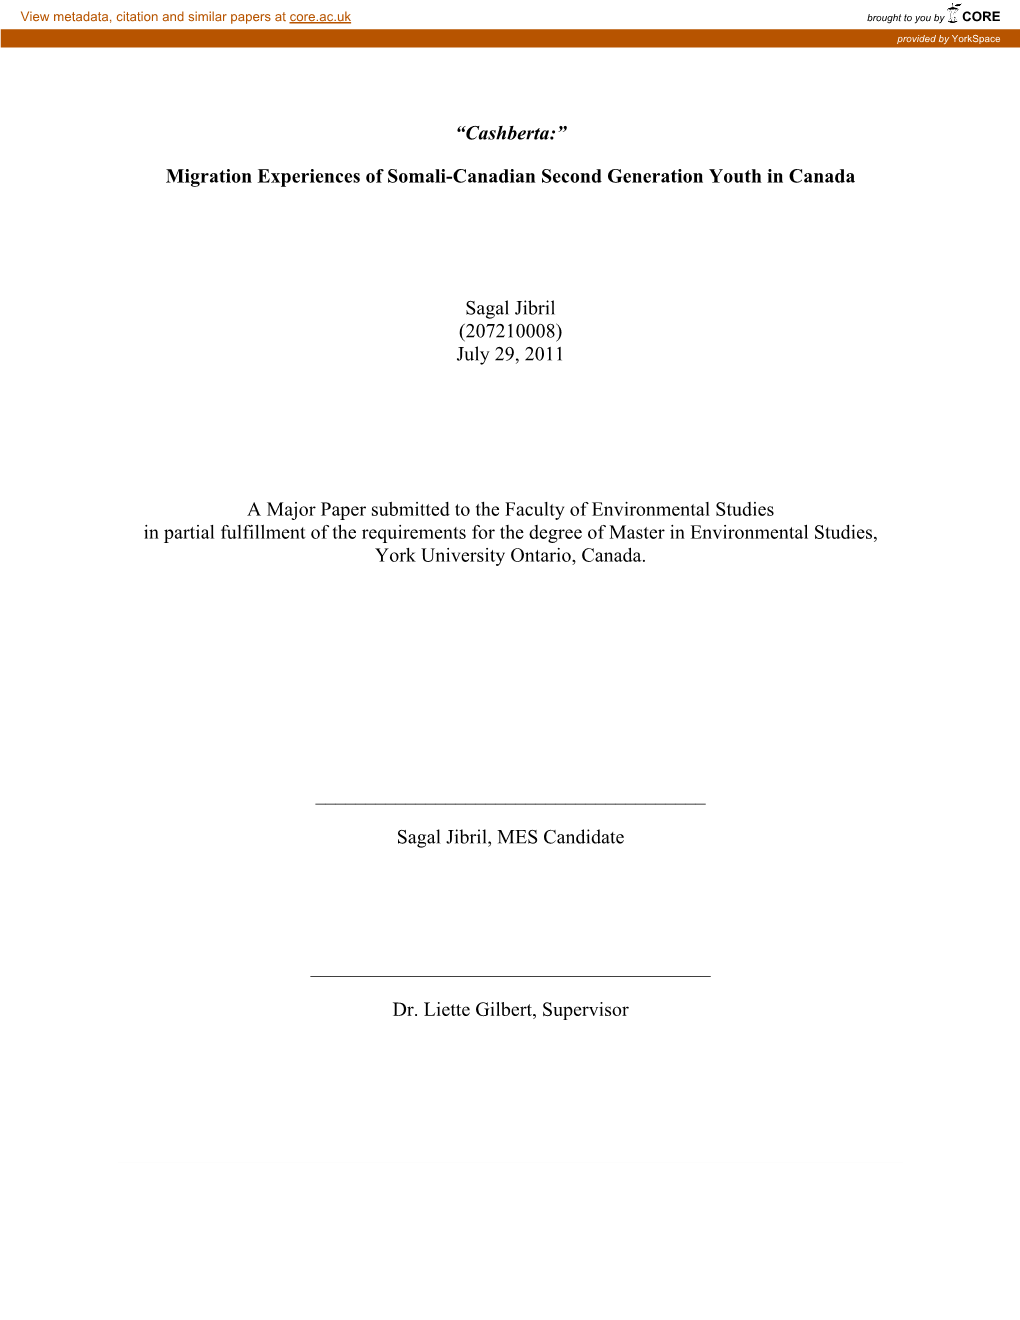 Migration Experiences of Somali-Canadian Second Generation Youth in Canada